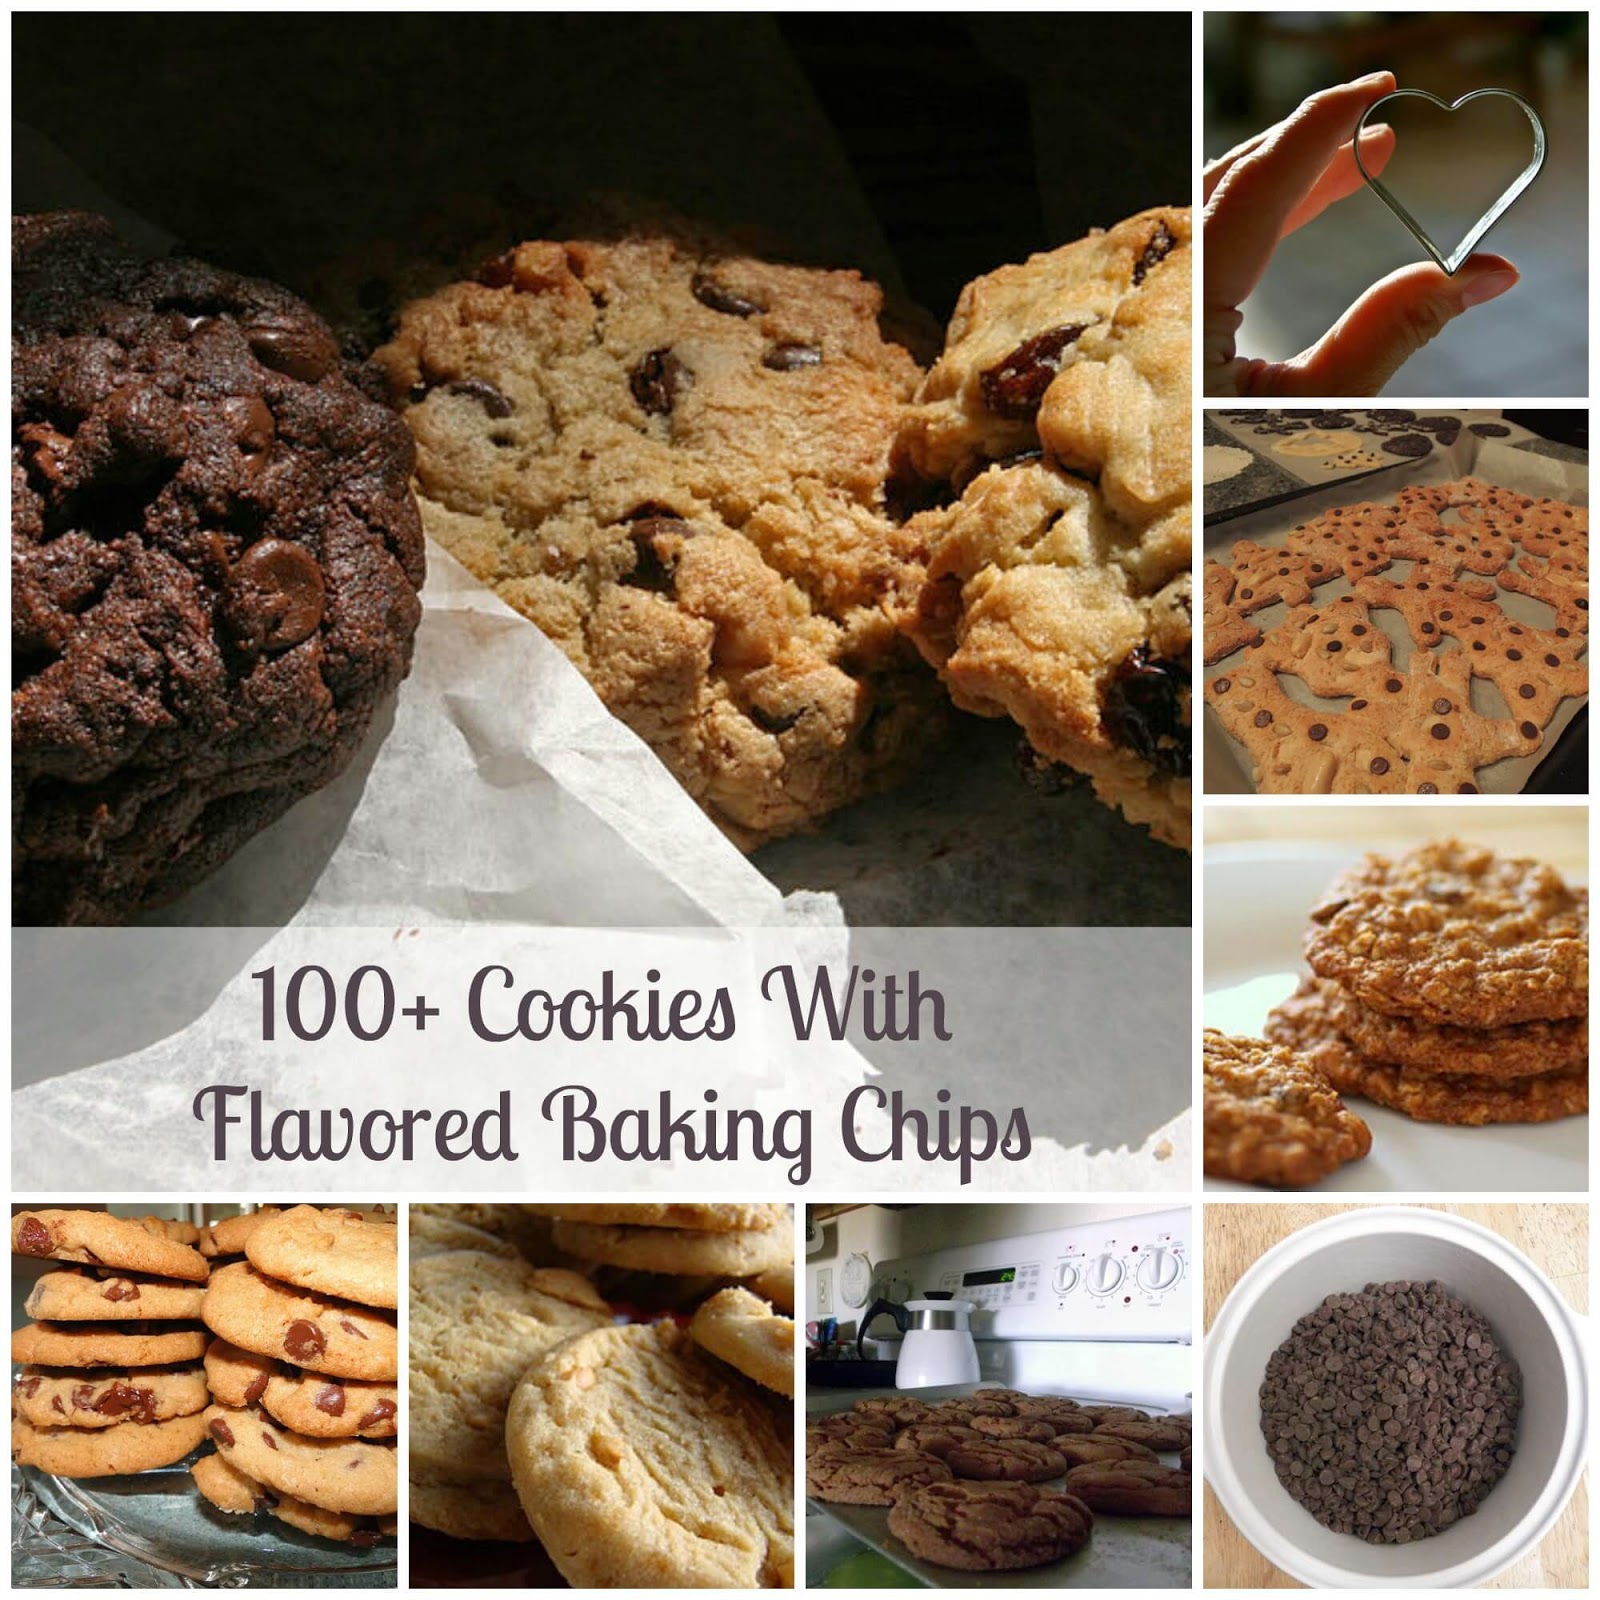 100+ Cookies With Flavored Baking Chips | Becky Cooks Lightly #cookies #bakingchips